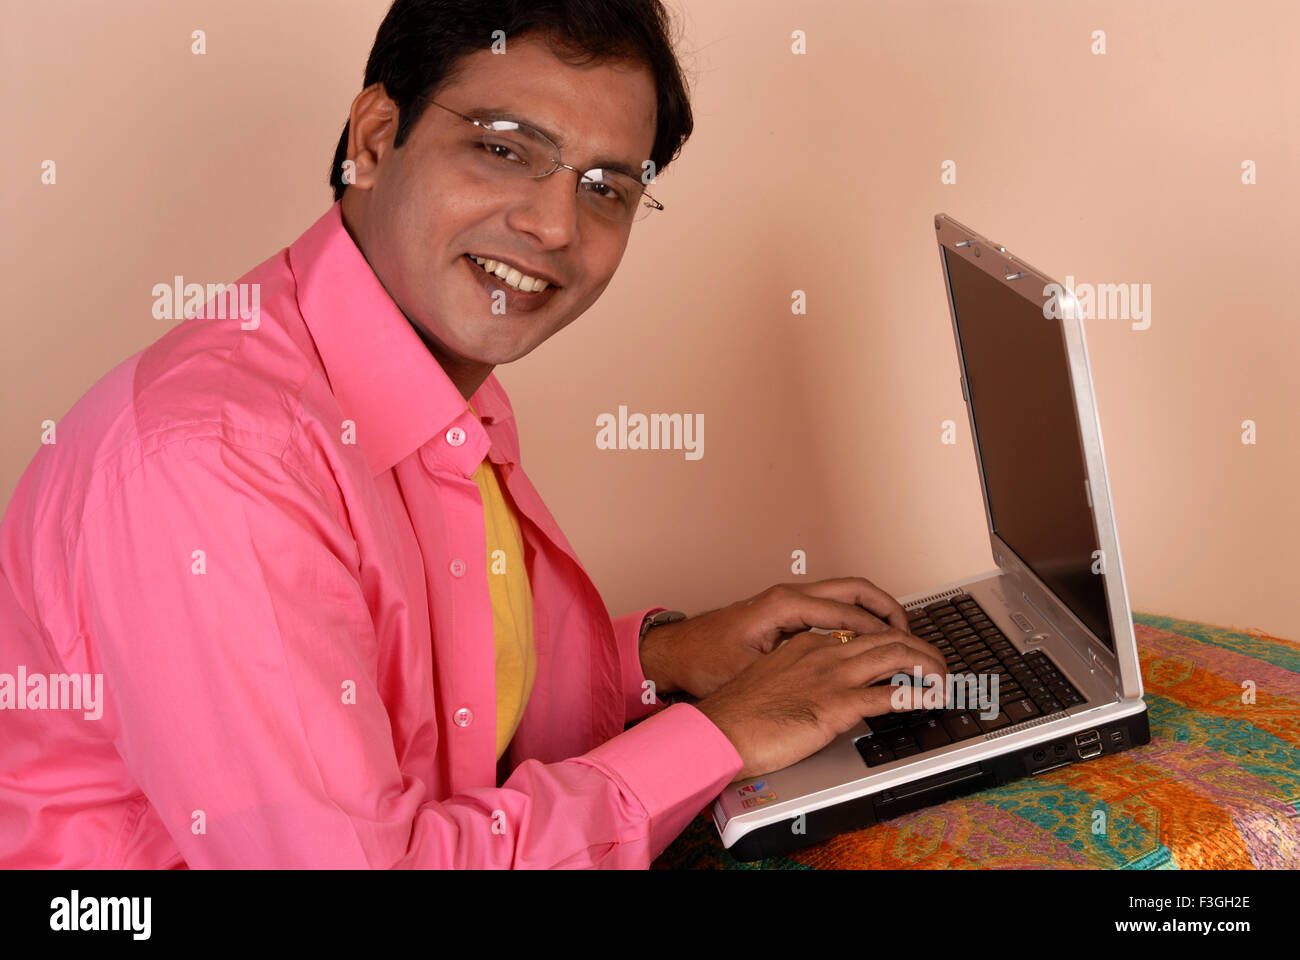 Indian man working on laptop computer India MR#364 Stock Photo - Alamy